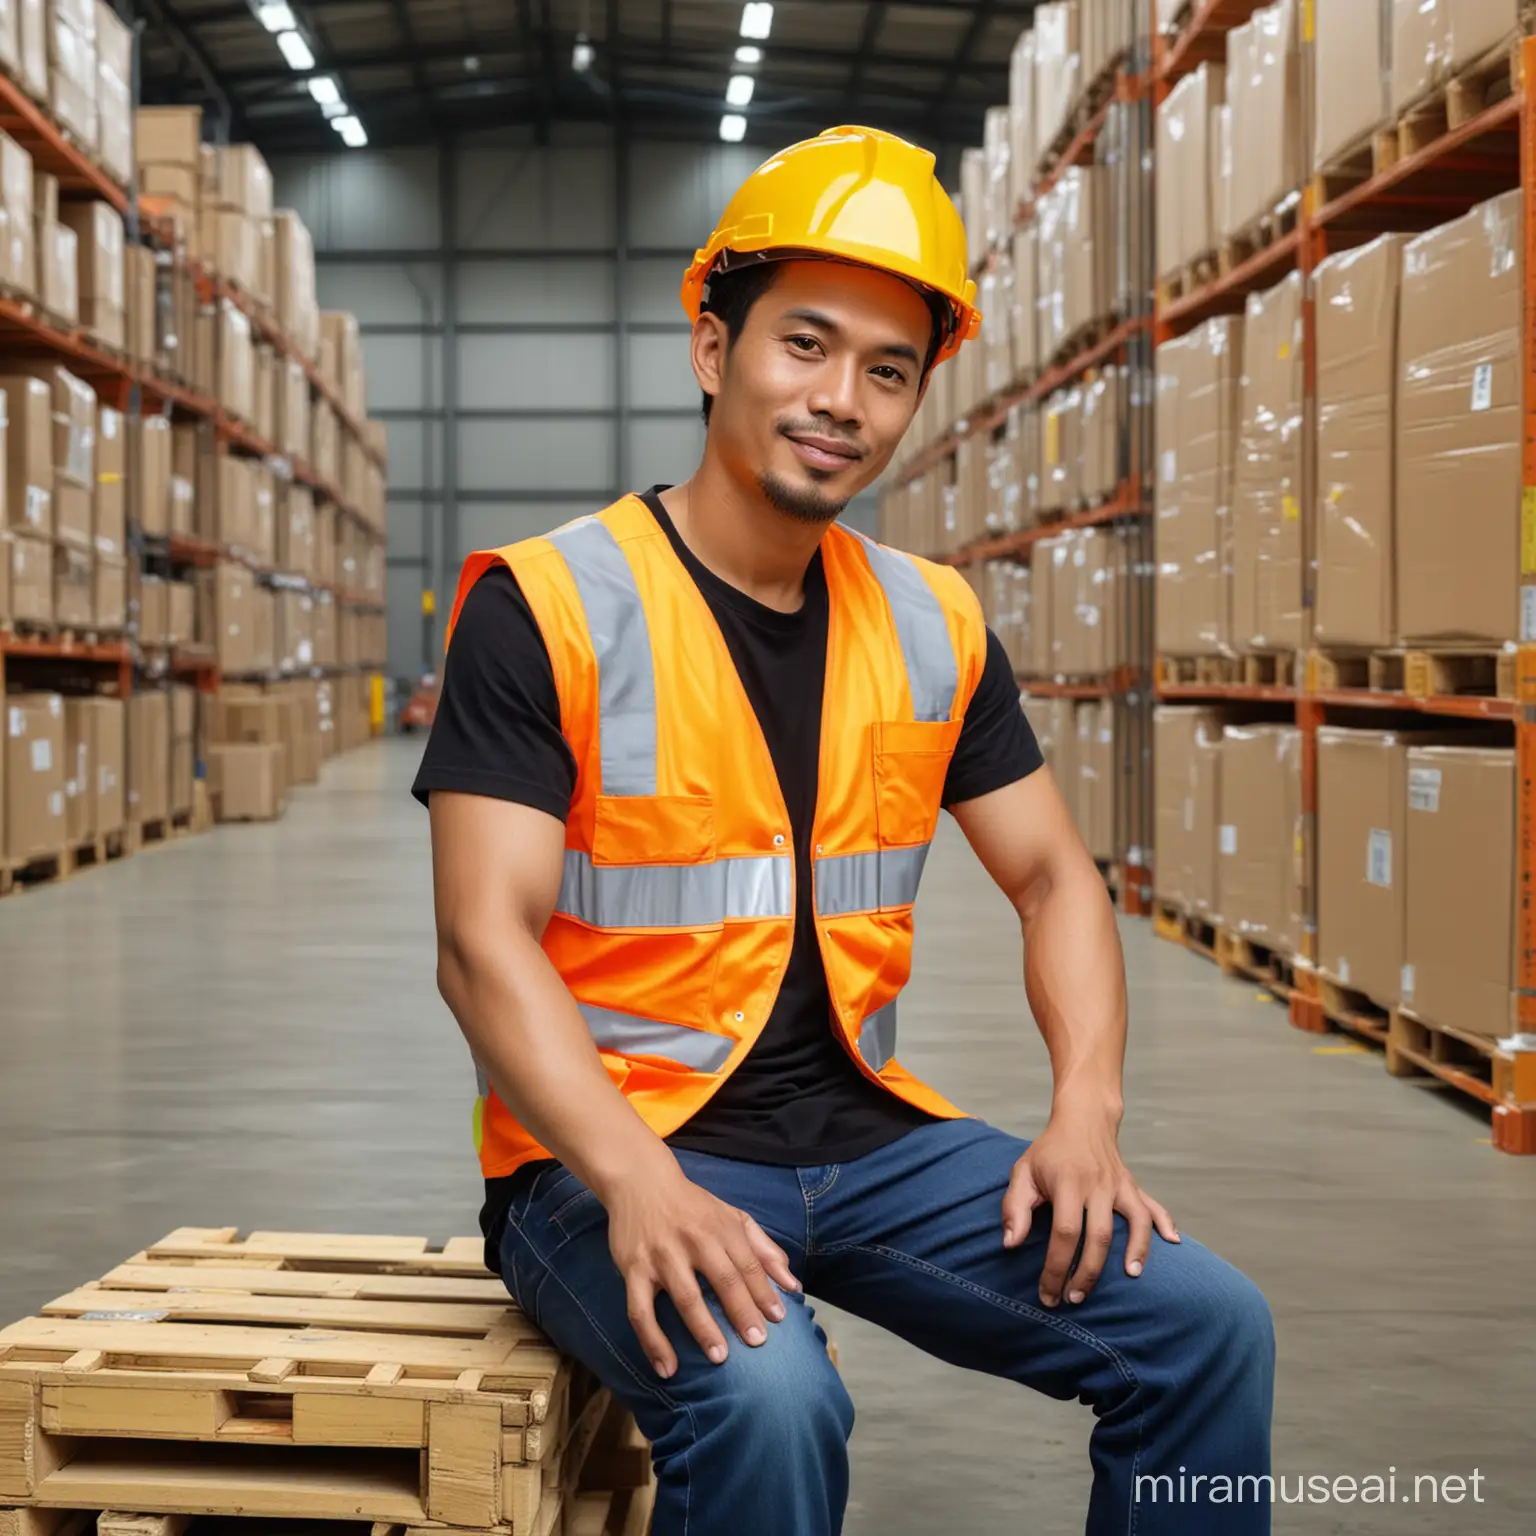 Handsome Indonesian Man in Safety Gear Sitting in Distribution Center Warehouse